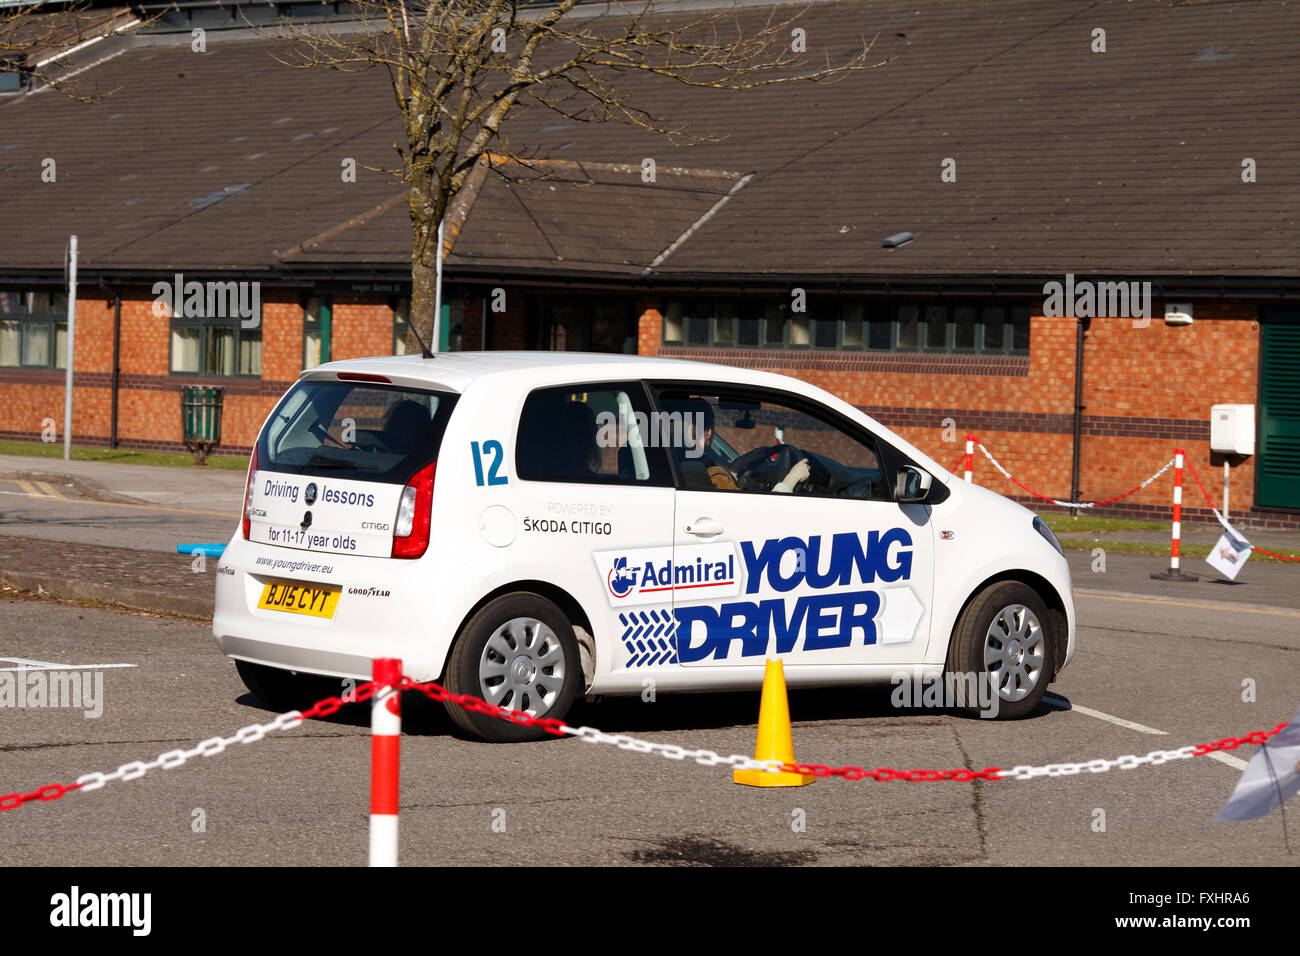 Admiral Young driver car scheme for teaching 11 to 17 year olds to drive. Stock Photo